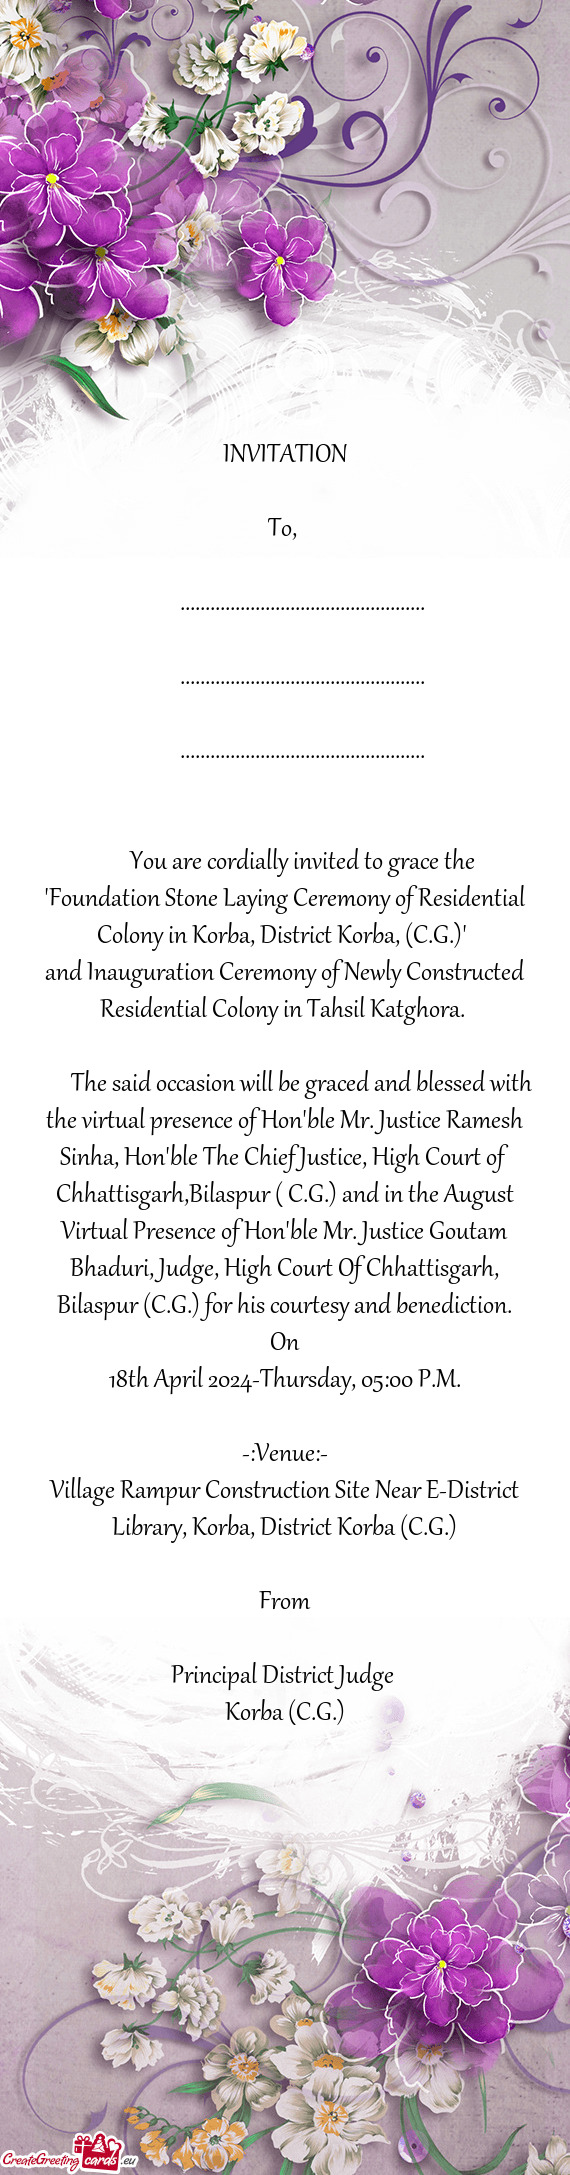 You are cordially invited to grace the "Foundation Stone Laying Ceremony of Residential Colon